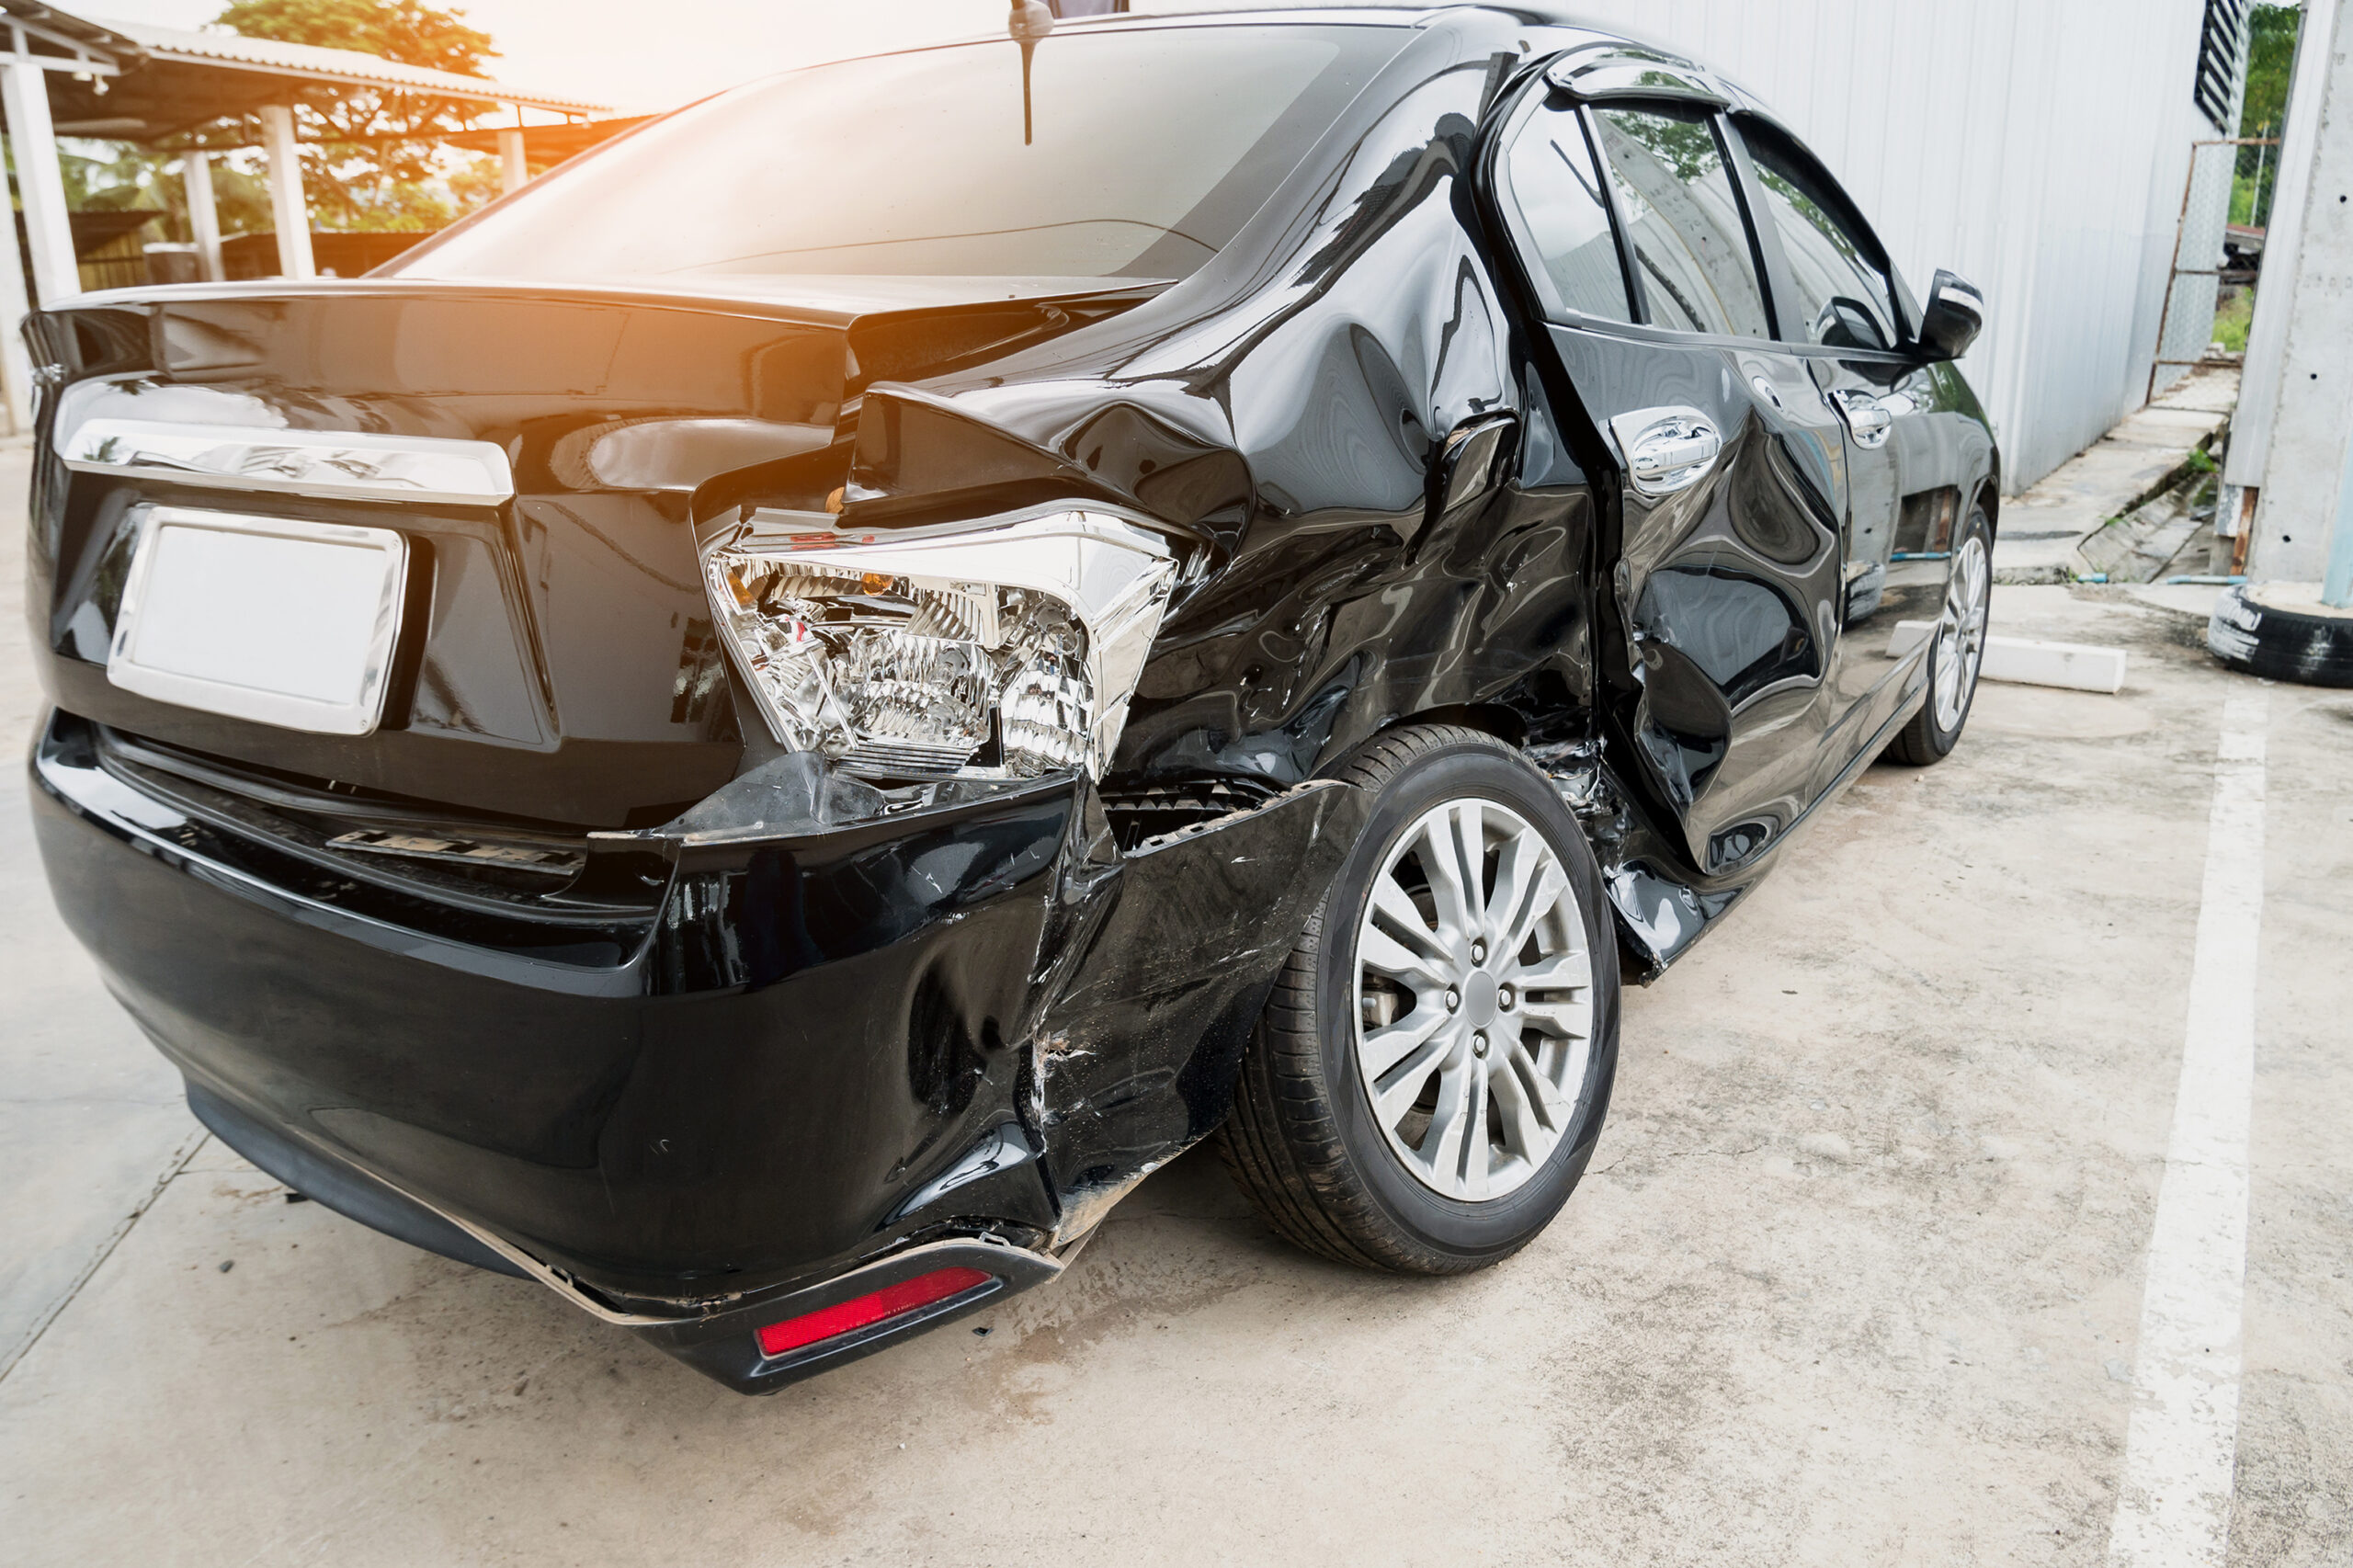 Crunched side of a vehicle as featured image for an article on vehicle property damage lawyer insights